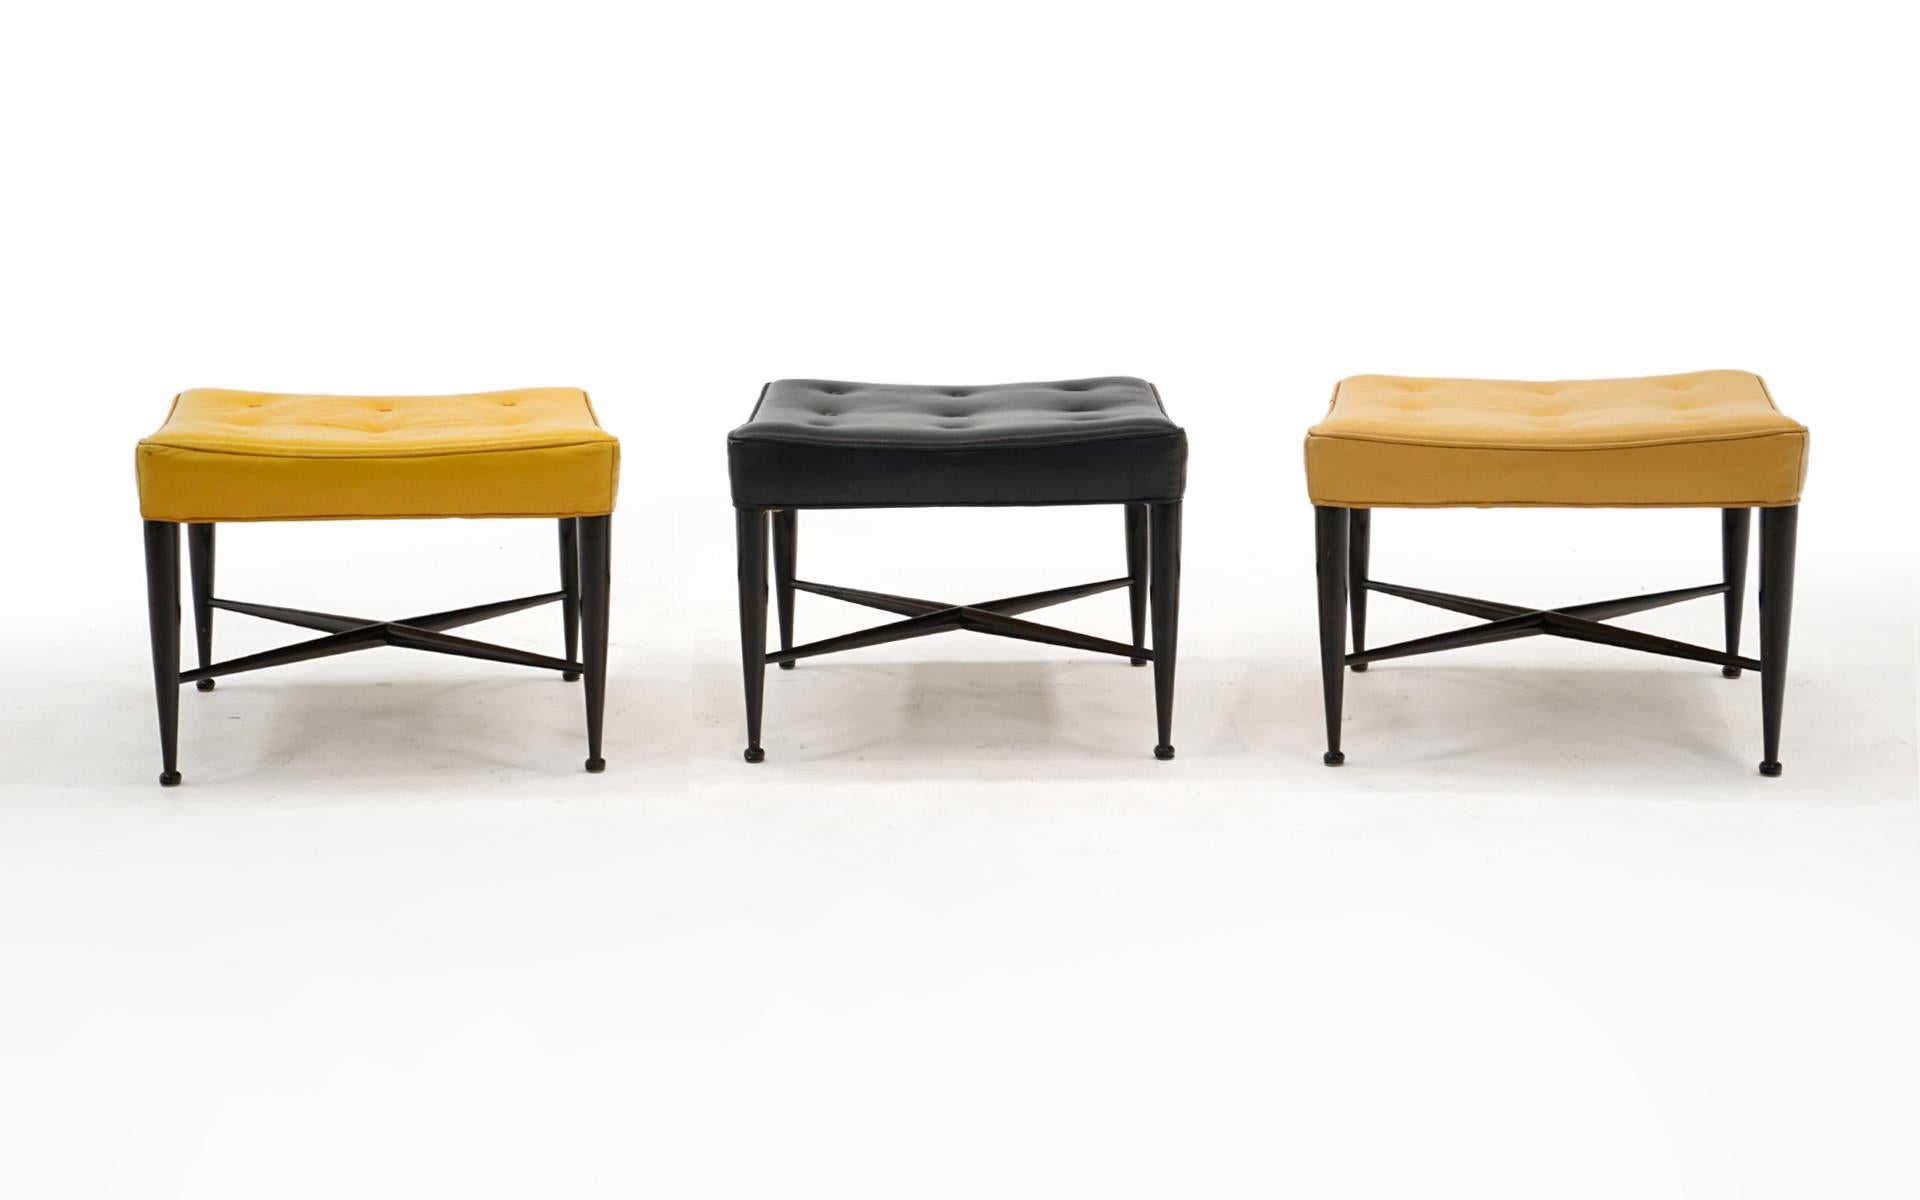 Rare set of three completely original, one owner, x base Thebes Stools designed by Edward Wormley and manufactured by Dunbar, 1950s.  Signed with the Dunbar metal tag.  Three colors of leather: yellow, muted yellow and charcoal.  The yellow example